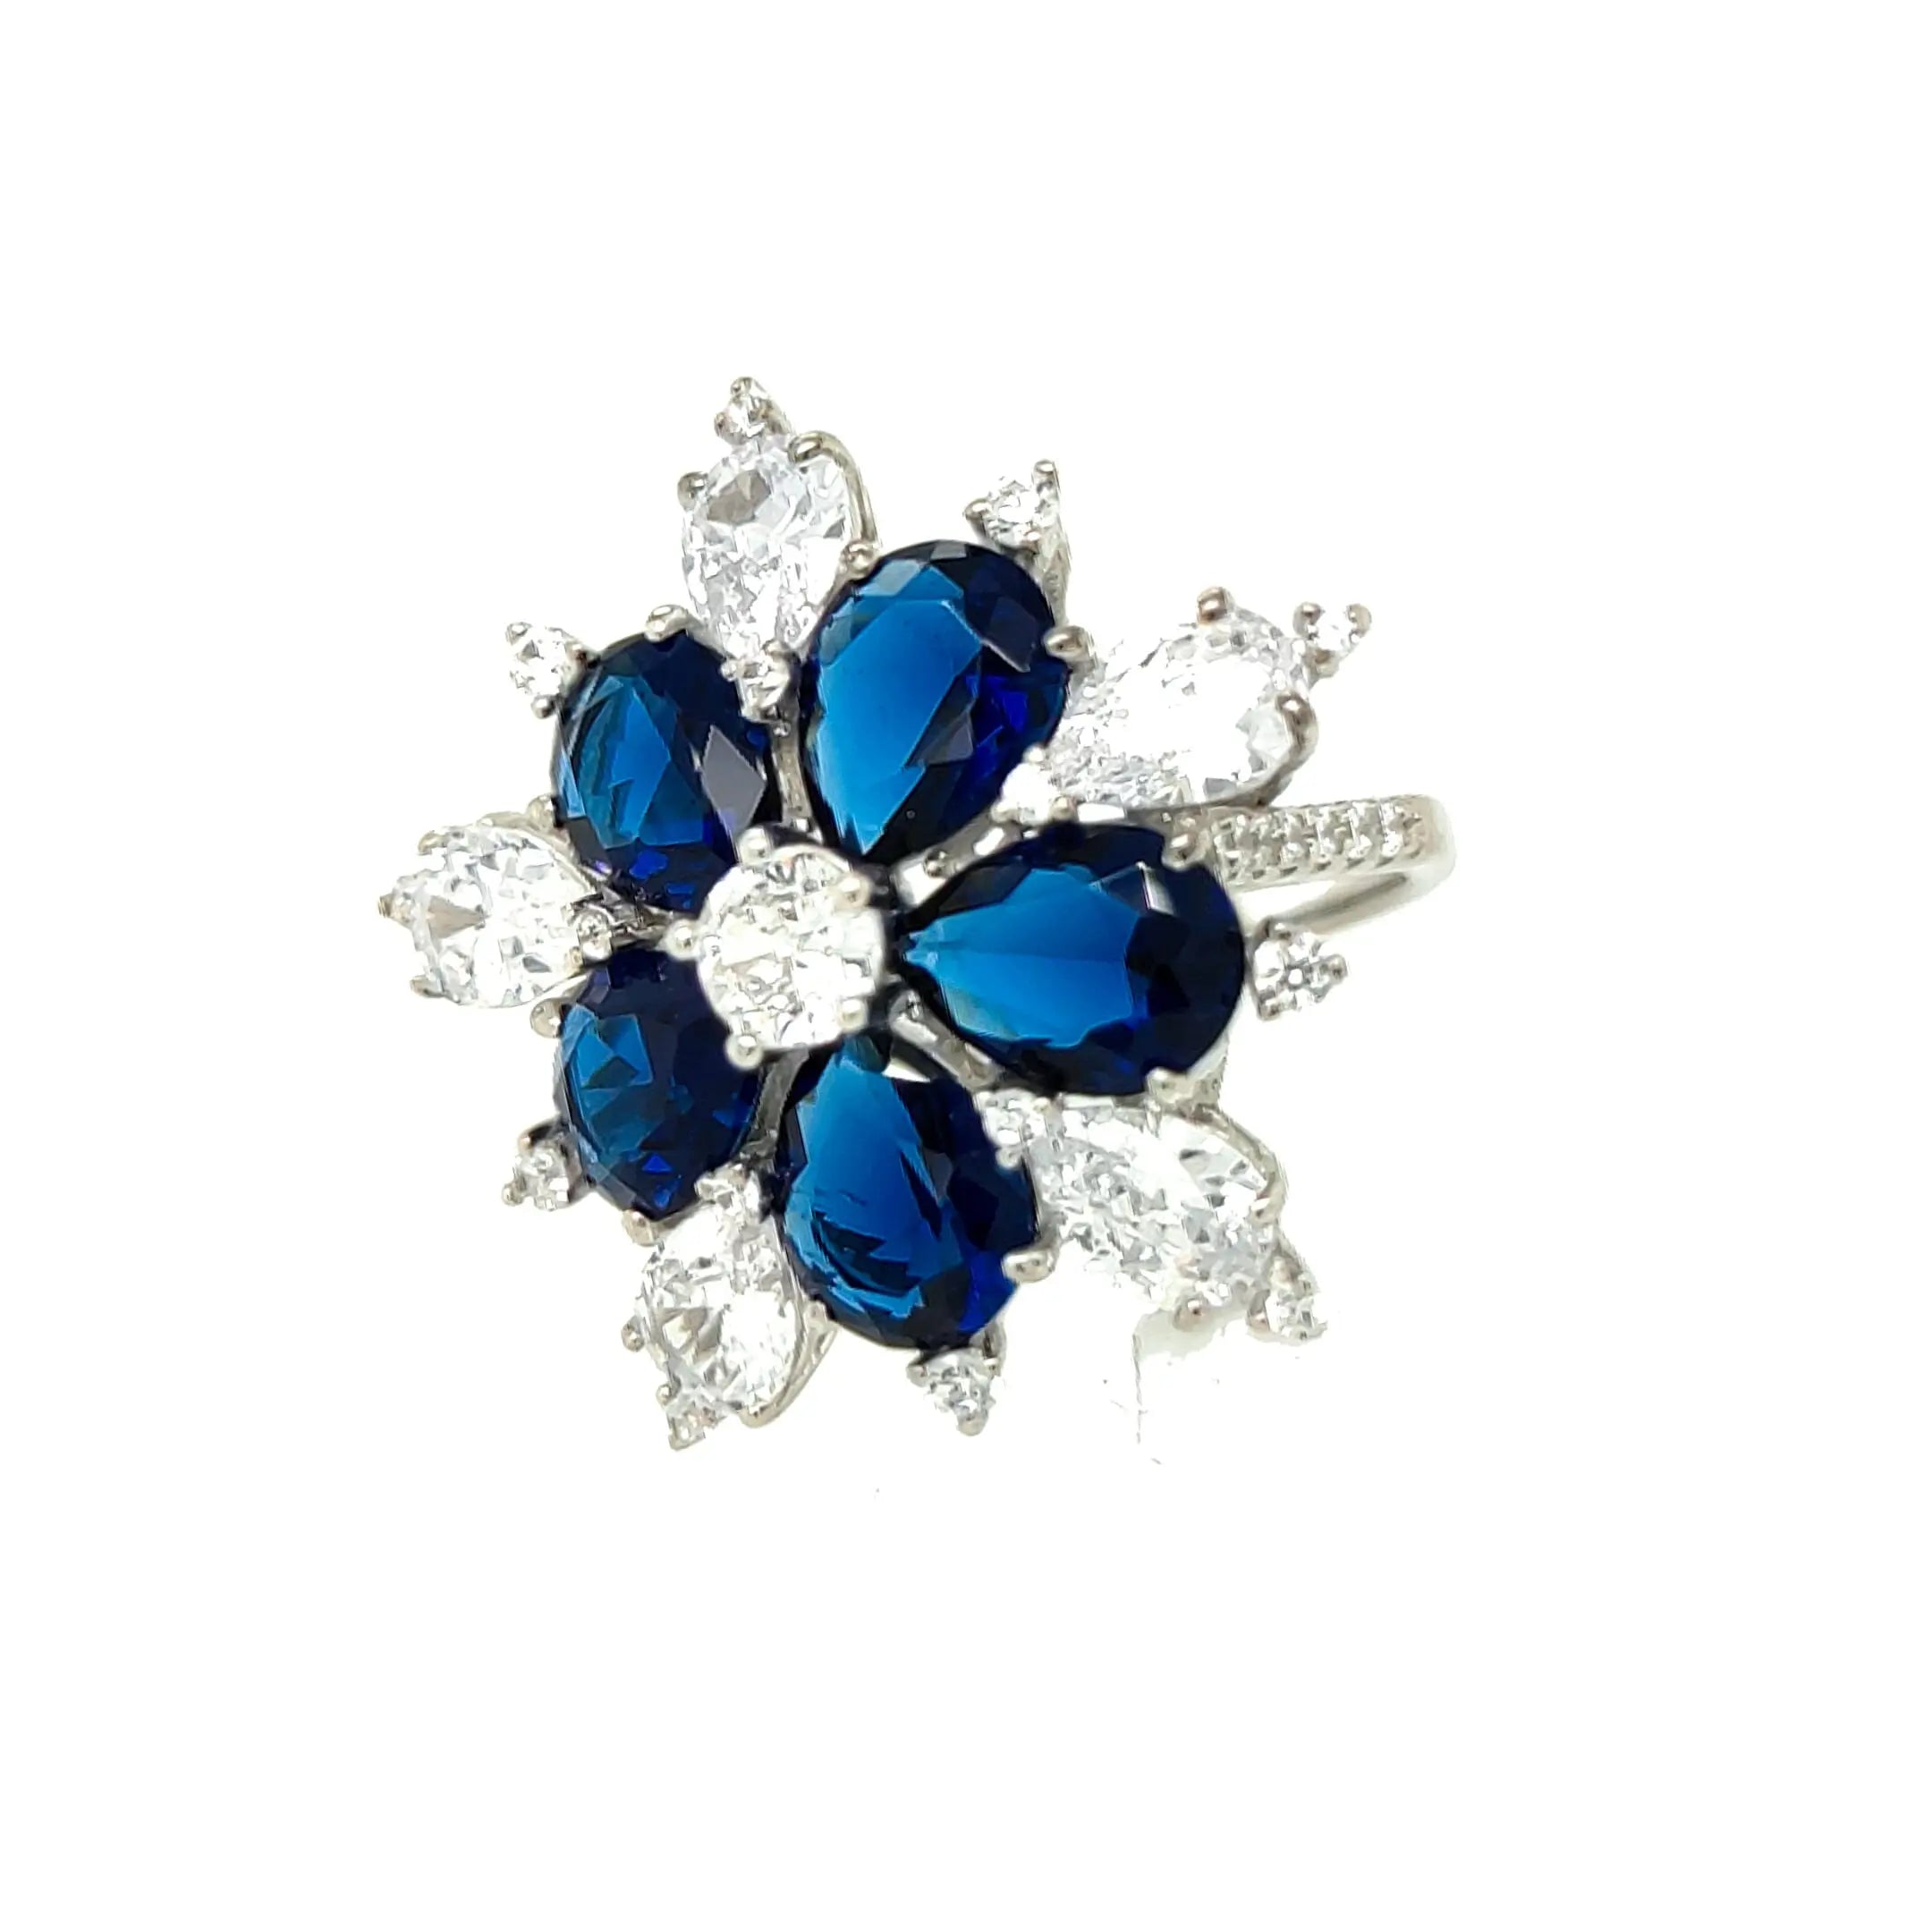 Asfour Crystal 925 Silver Flower Shape With Blue & Clear Crystal Lobes Ring - Silver Size 8